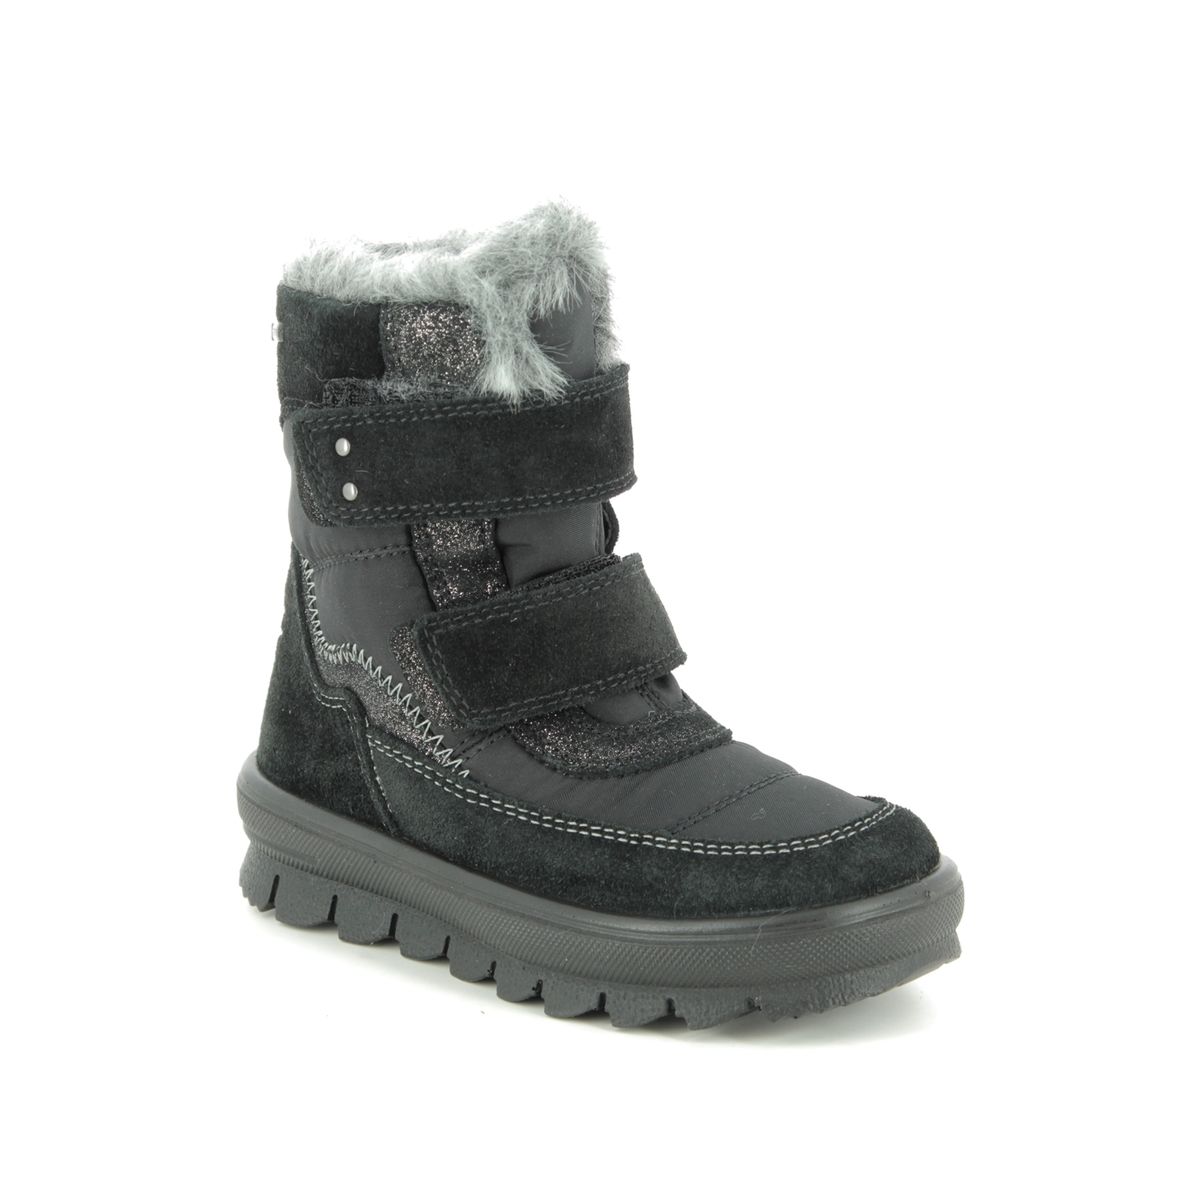 Superfit Flavia Vel Gtx Black Suede Kids Toddler Girls Boots 09214-00 In Size 31 In Plain Black Suede For kids